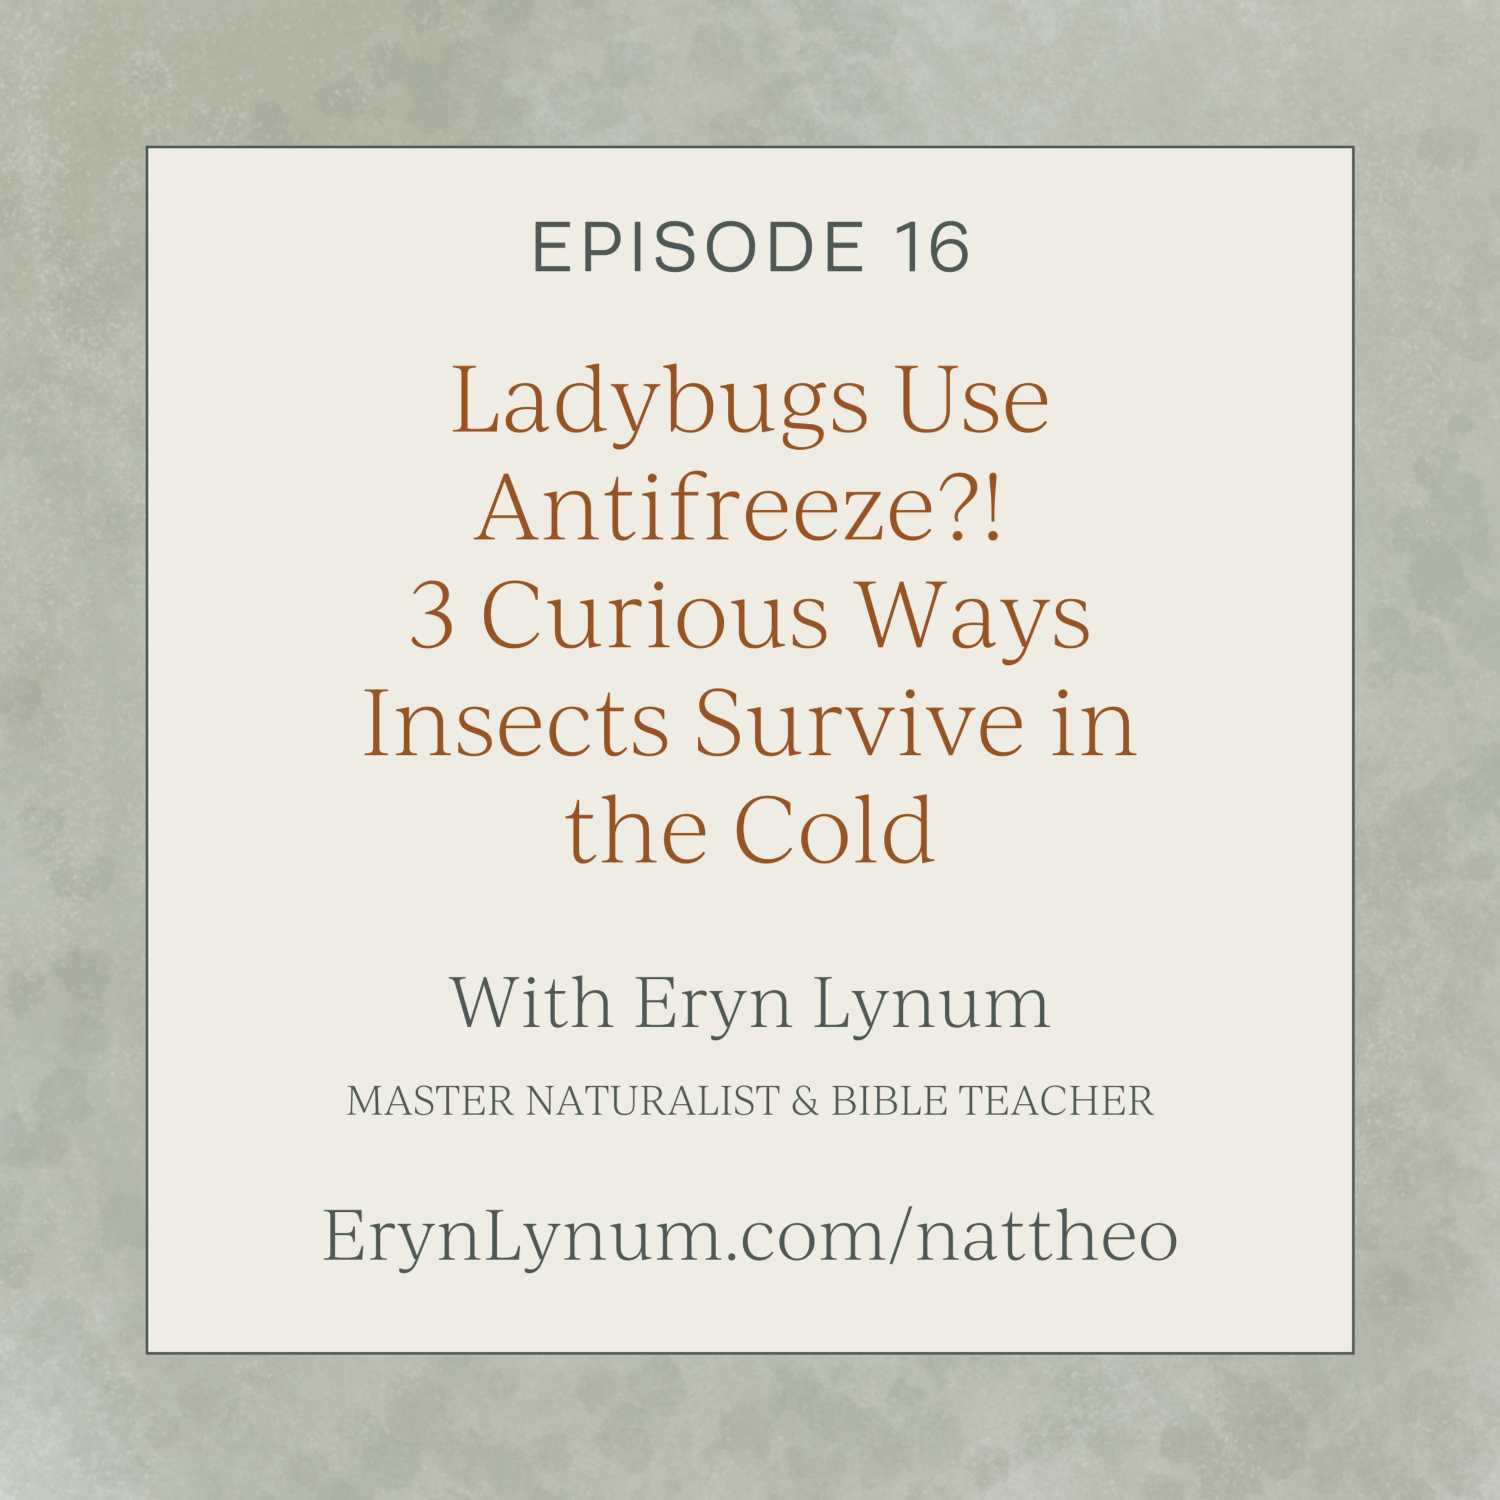 Ladybugs Use Antifreeze?! 3 Curious Ways Insects Survive in the Cold